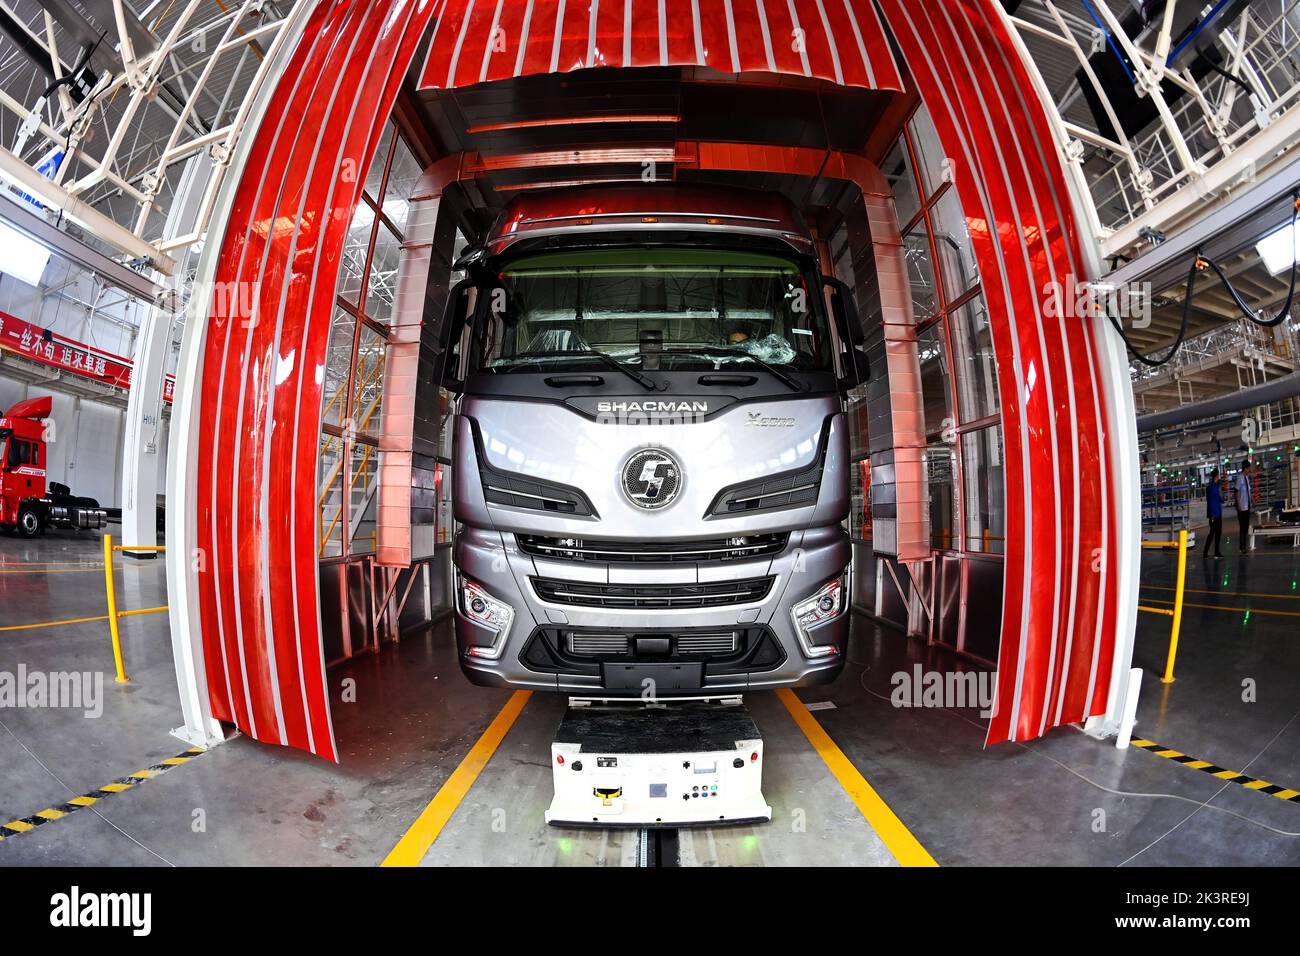 (220928) -- XI'AN, Sept. 28, 2022 (Xinhua) -- A heavy truck undergoes a test on the assembly line of the heavy truck capacity expansion project at the Shaanxi Automobile Holding Group in Xi'an, northwest China's Shaanxi Province, Sept. 27, 2022. Shaanxi Automobile Holding Group is a leading enterprise in equipment manufacturing in Shaanxi Province.   Since the beginning of this year, the overseas orders of Shaanxi Automobile have continued to grow. The heavy trucks produced here are exported to more than 130 countries and regions.    An expansion project is put into production recently to boos Stock Photo